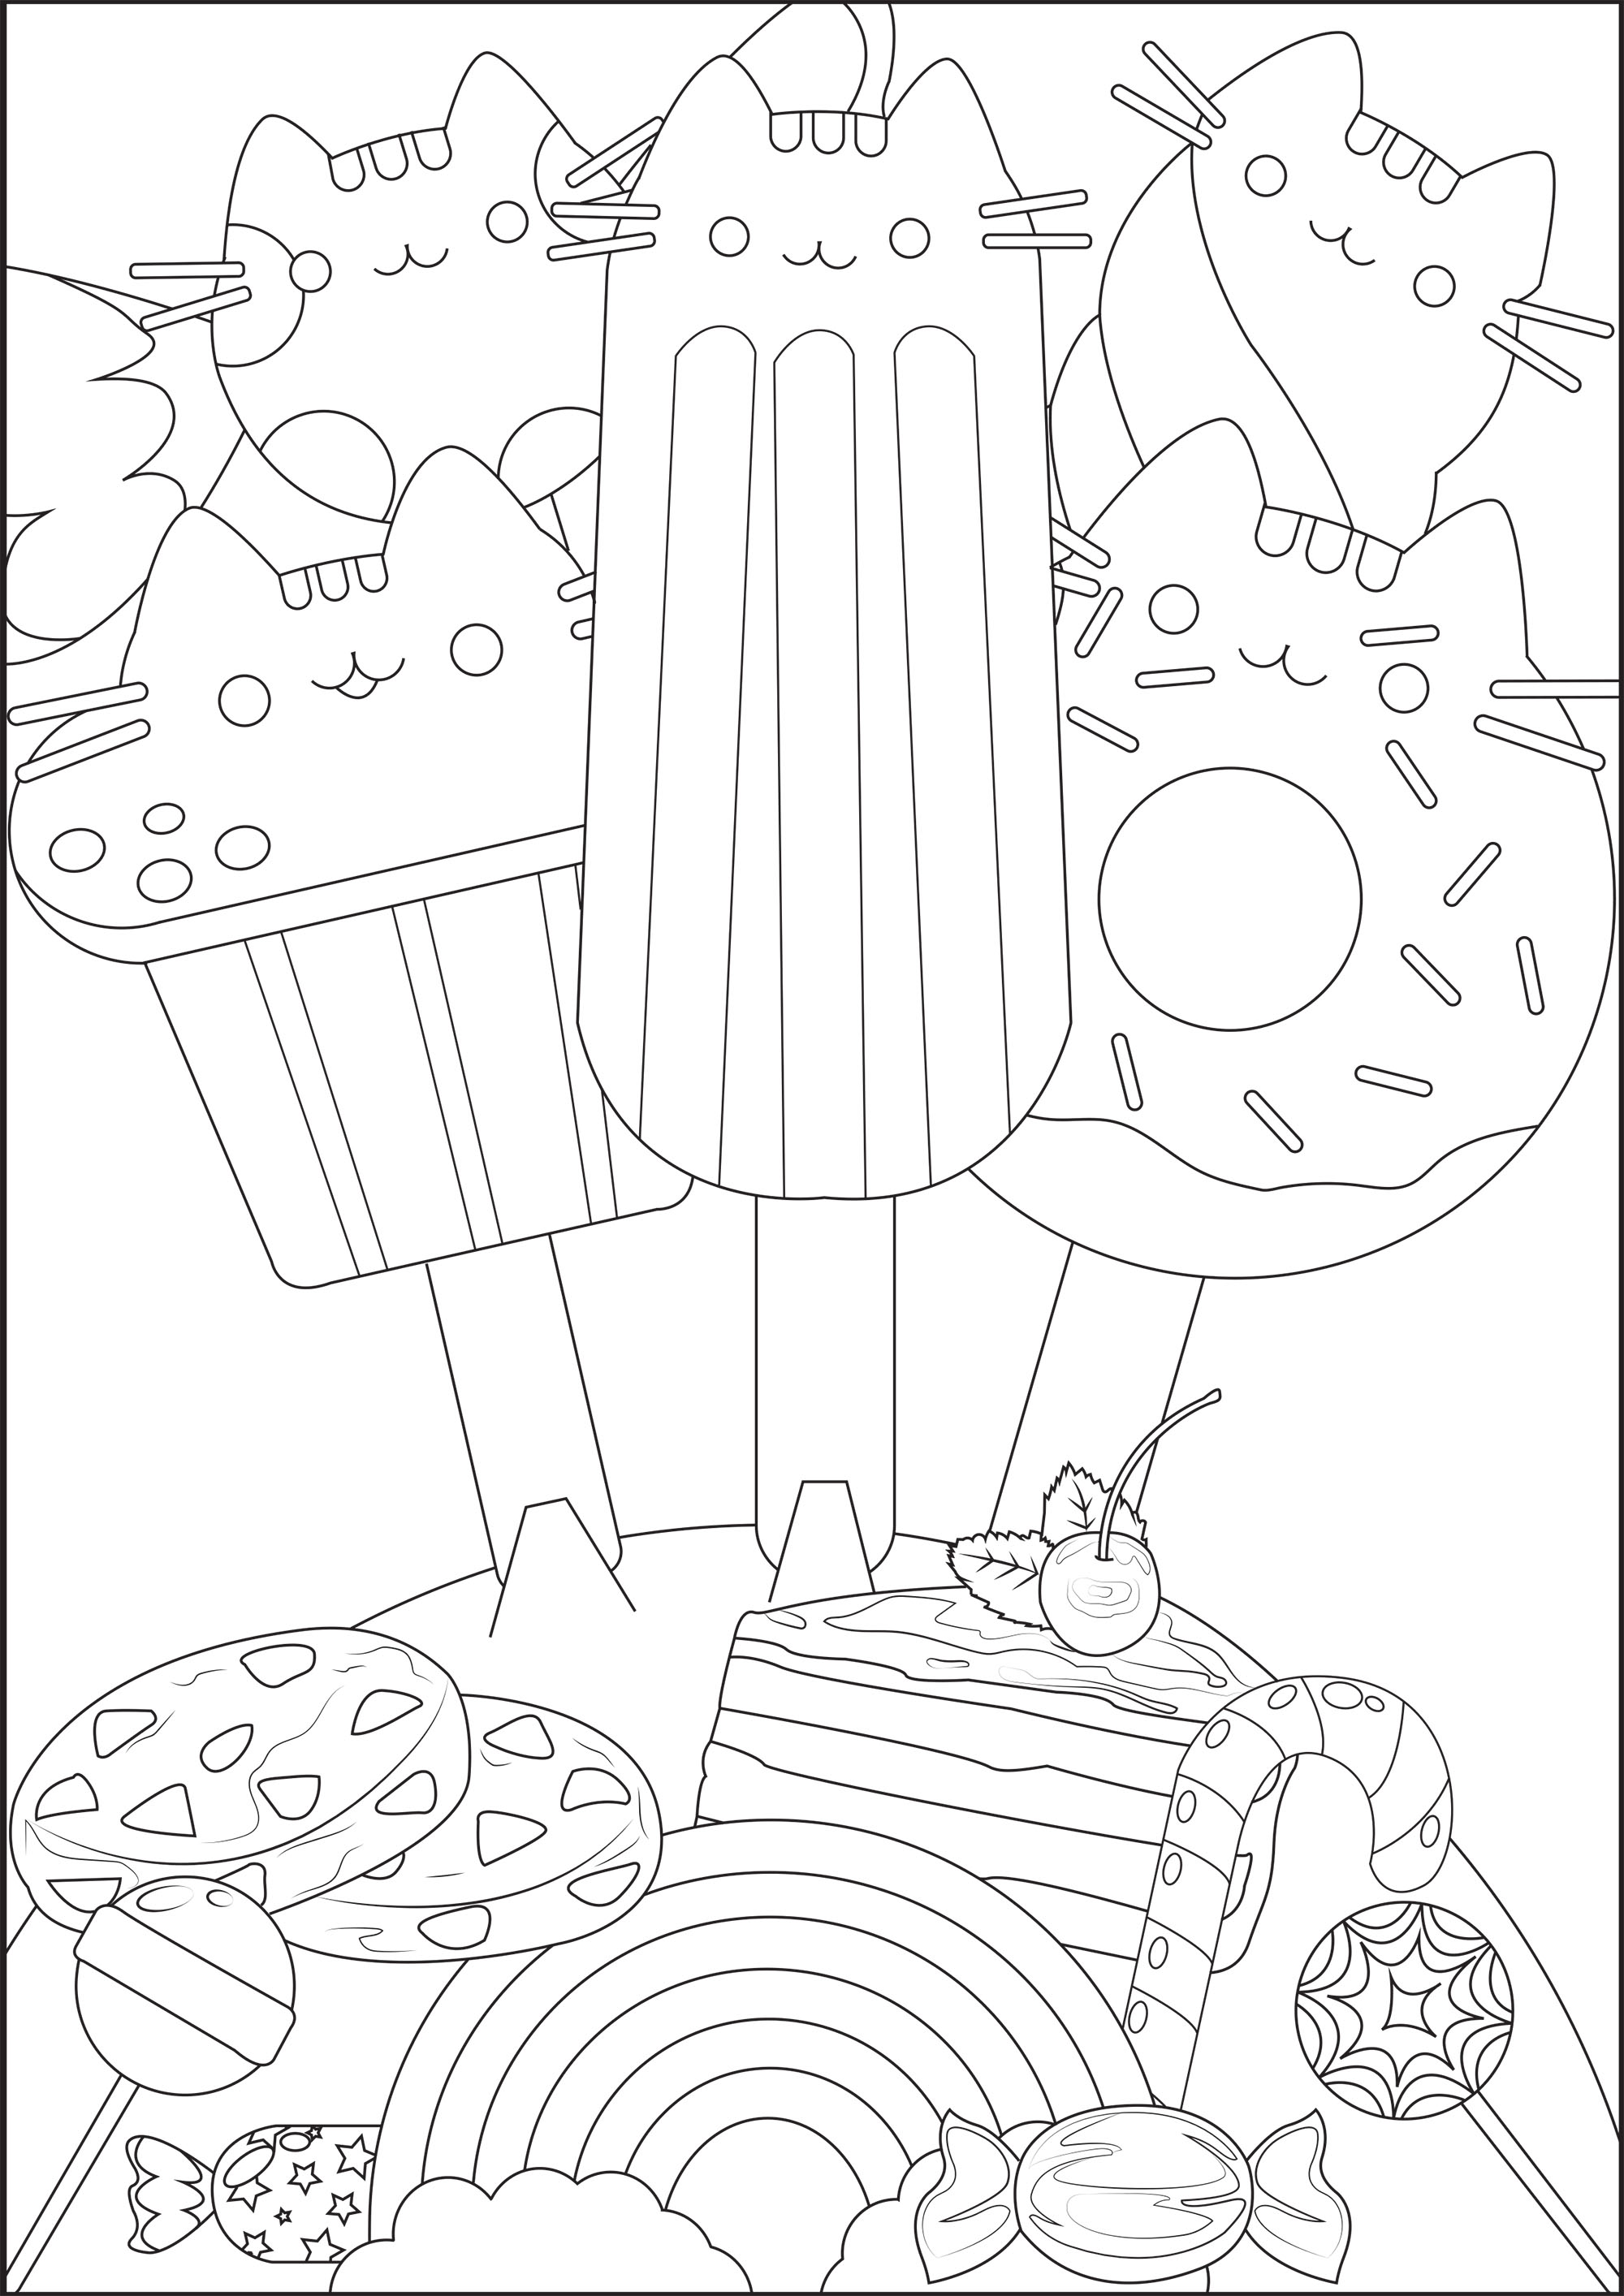 Ice cream Pusheen   Doodle Art / Doodling Adult Coloring Pages